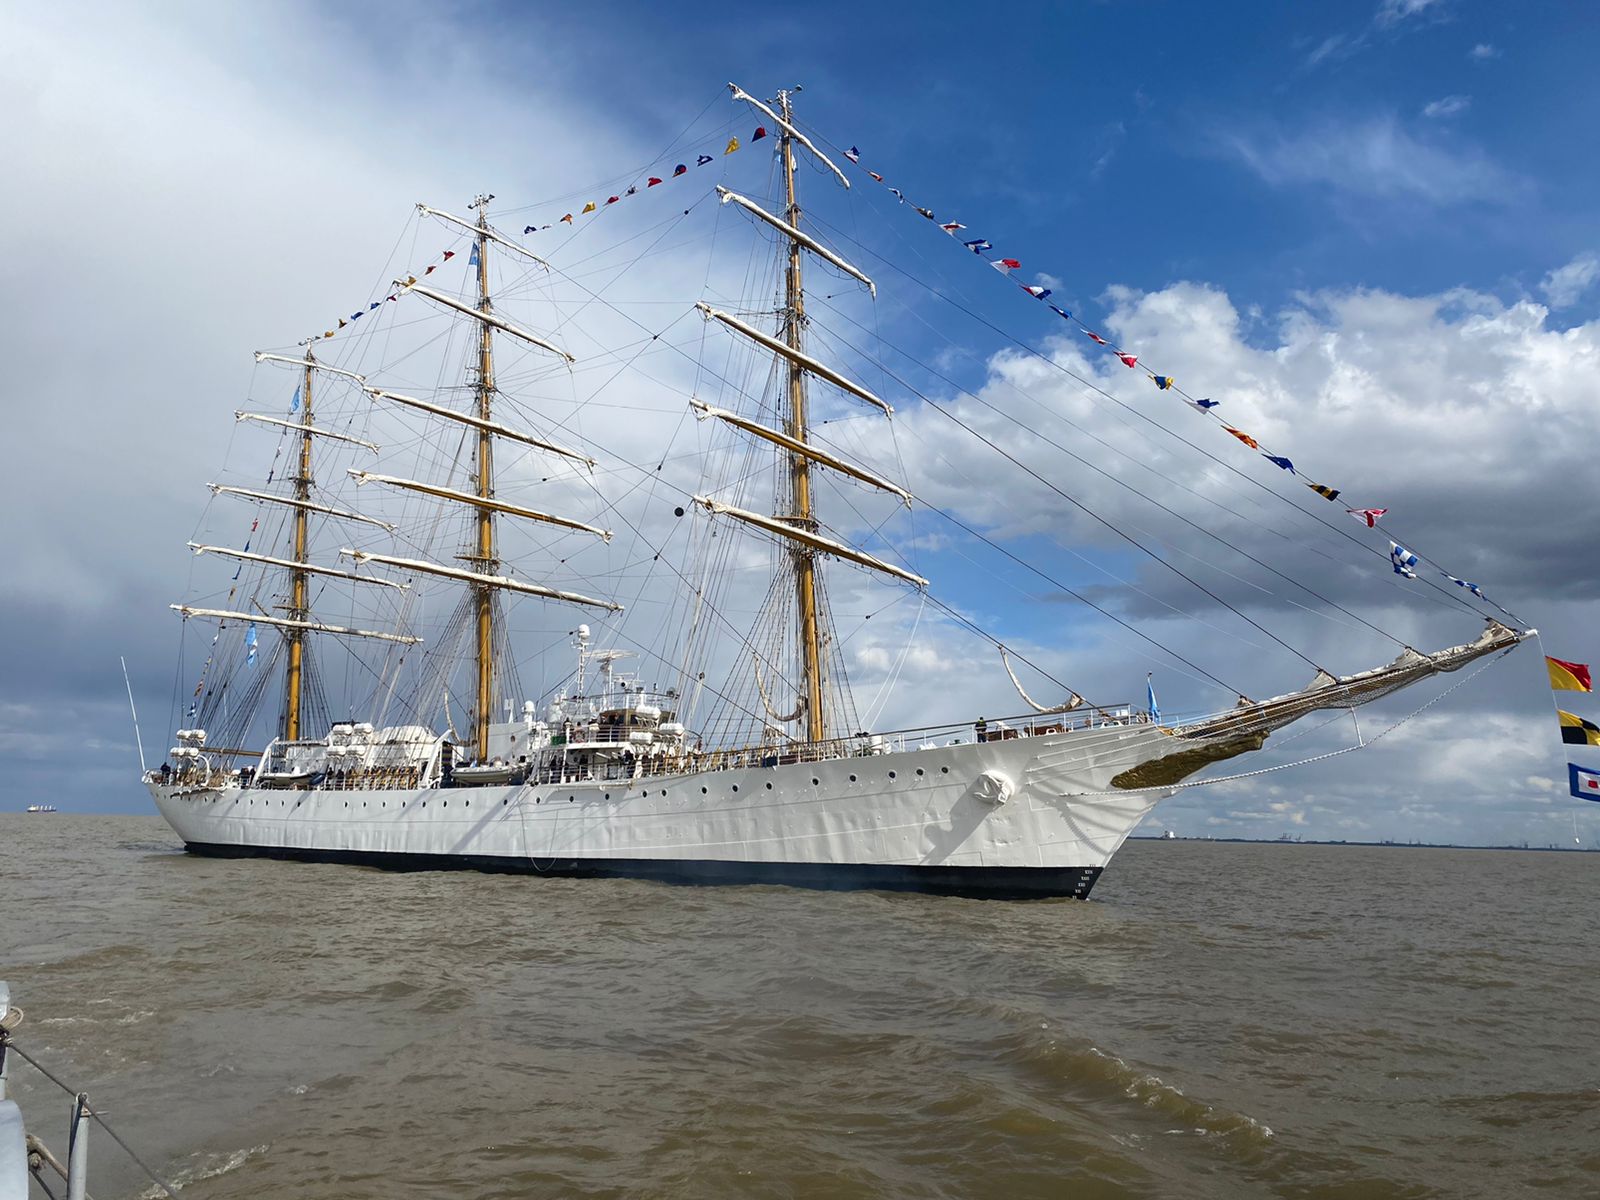 The frigate ARA Libertad is anchored in the Rada La Plata awaiting the resolution of the union dispute